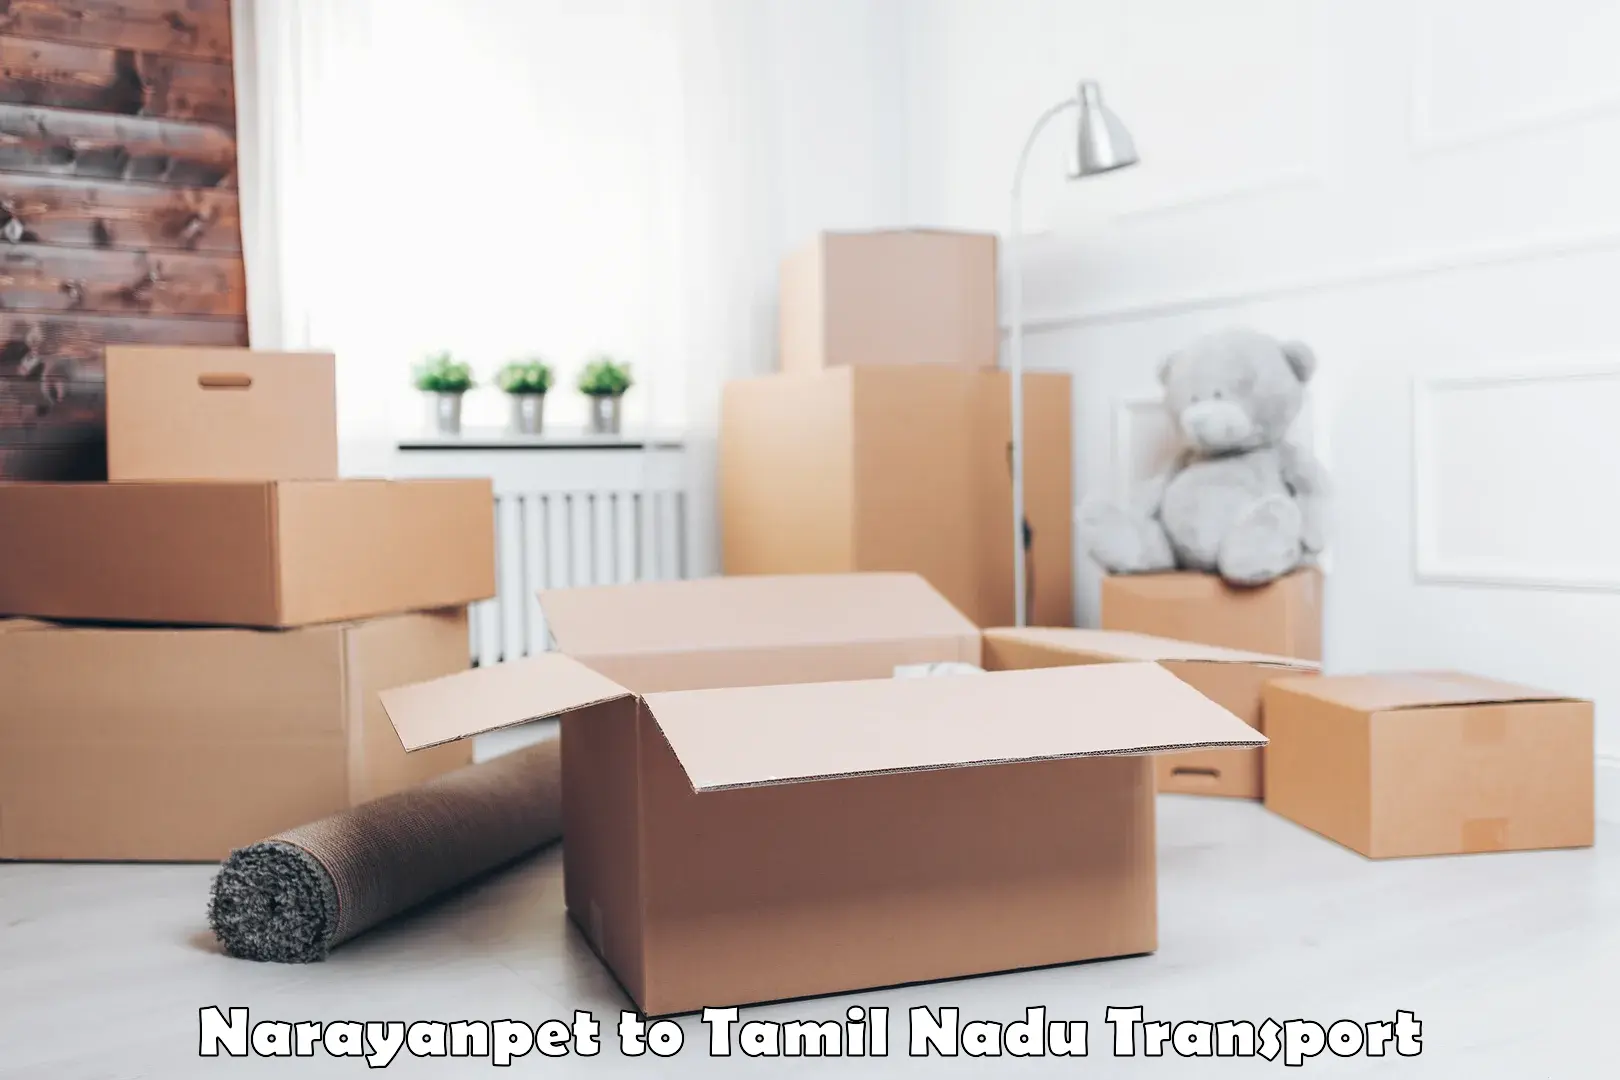 Air freight transport services Narayanpet to Gummidipoondi